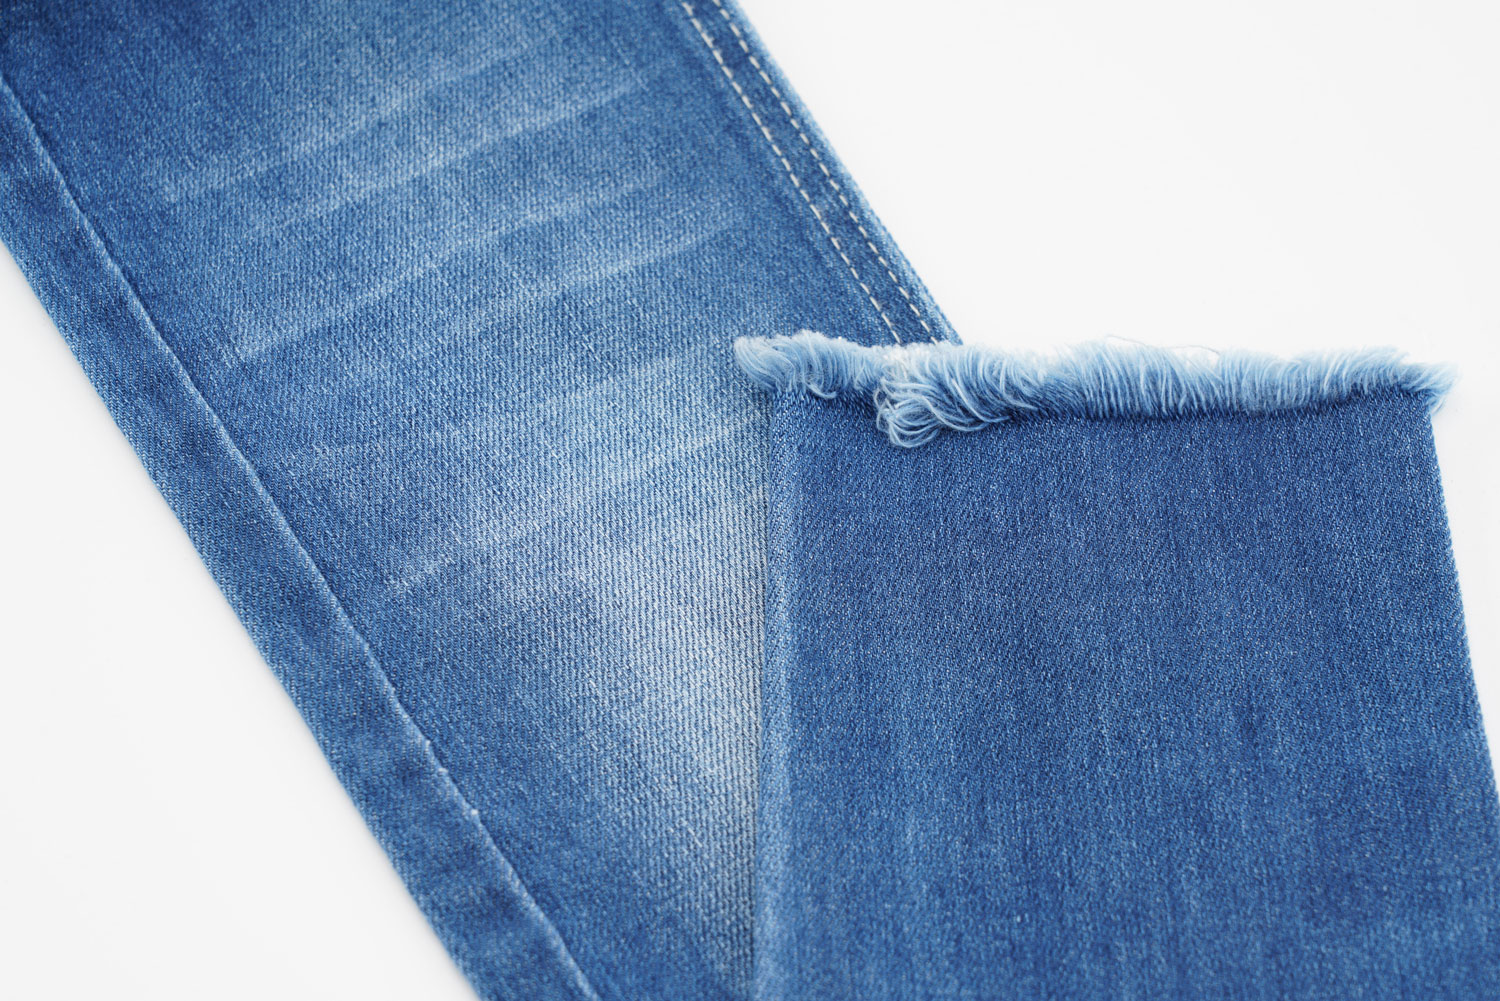 What's the Benefits of a Cotton Denim Supplier ? 2